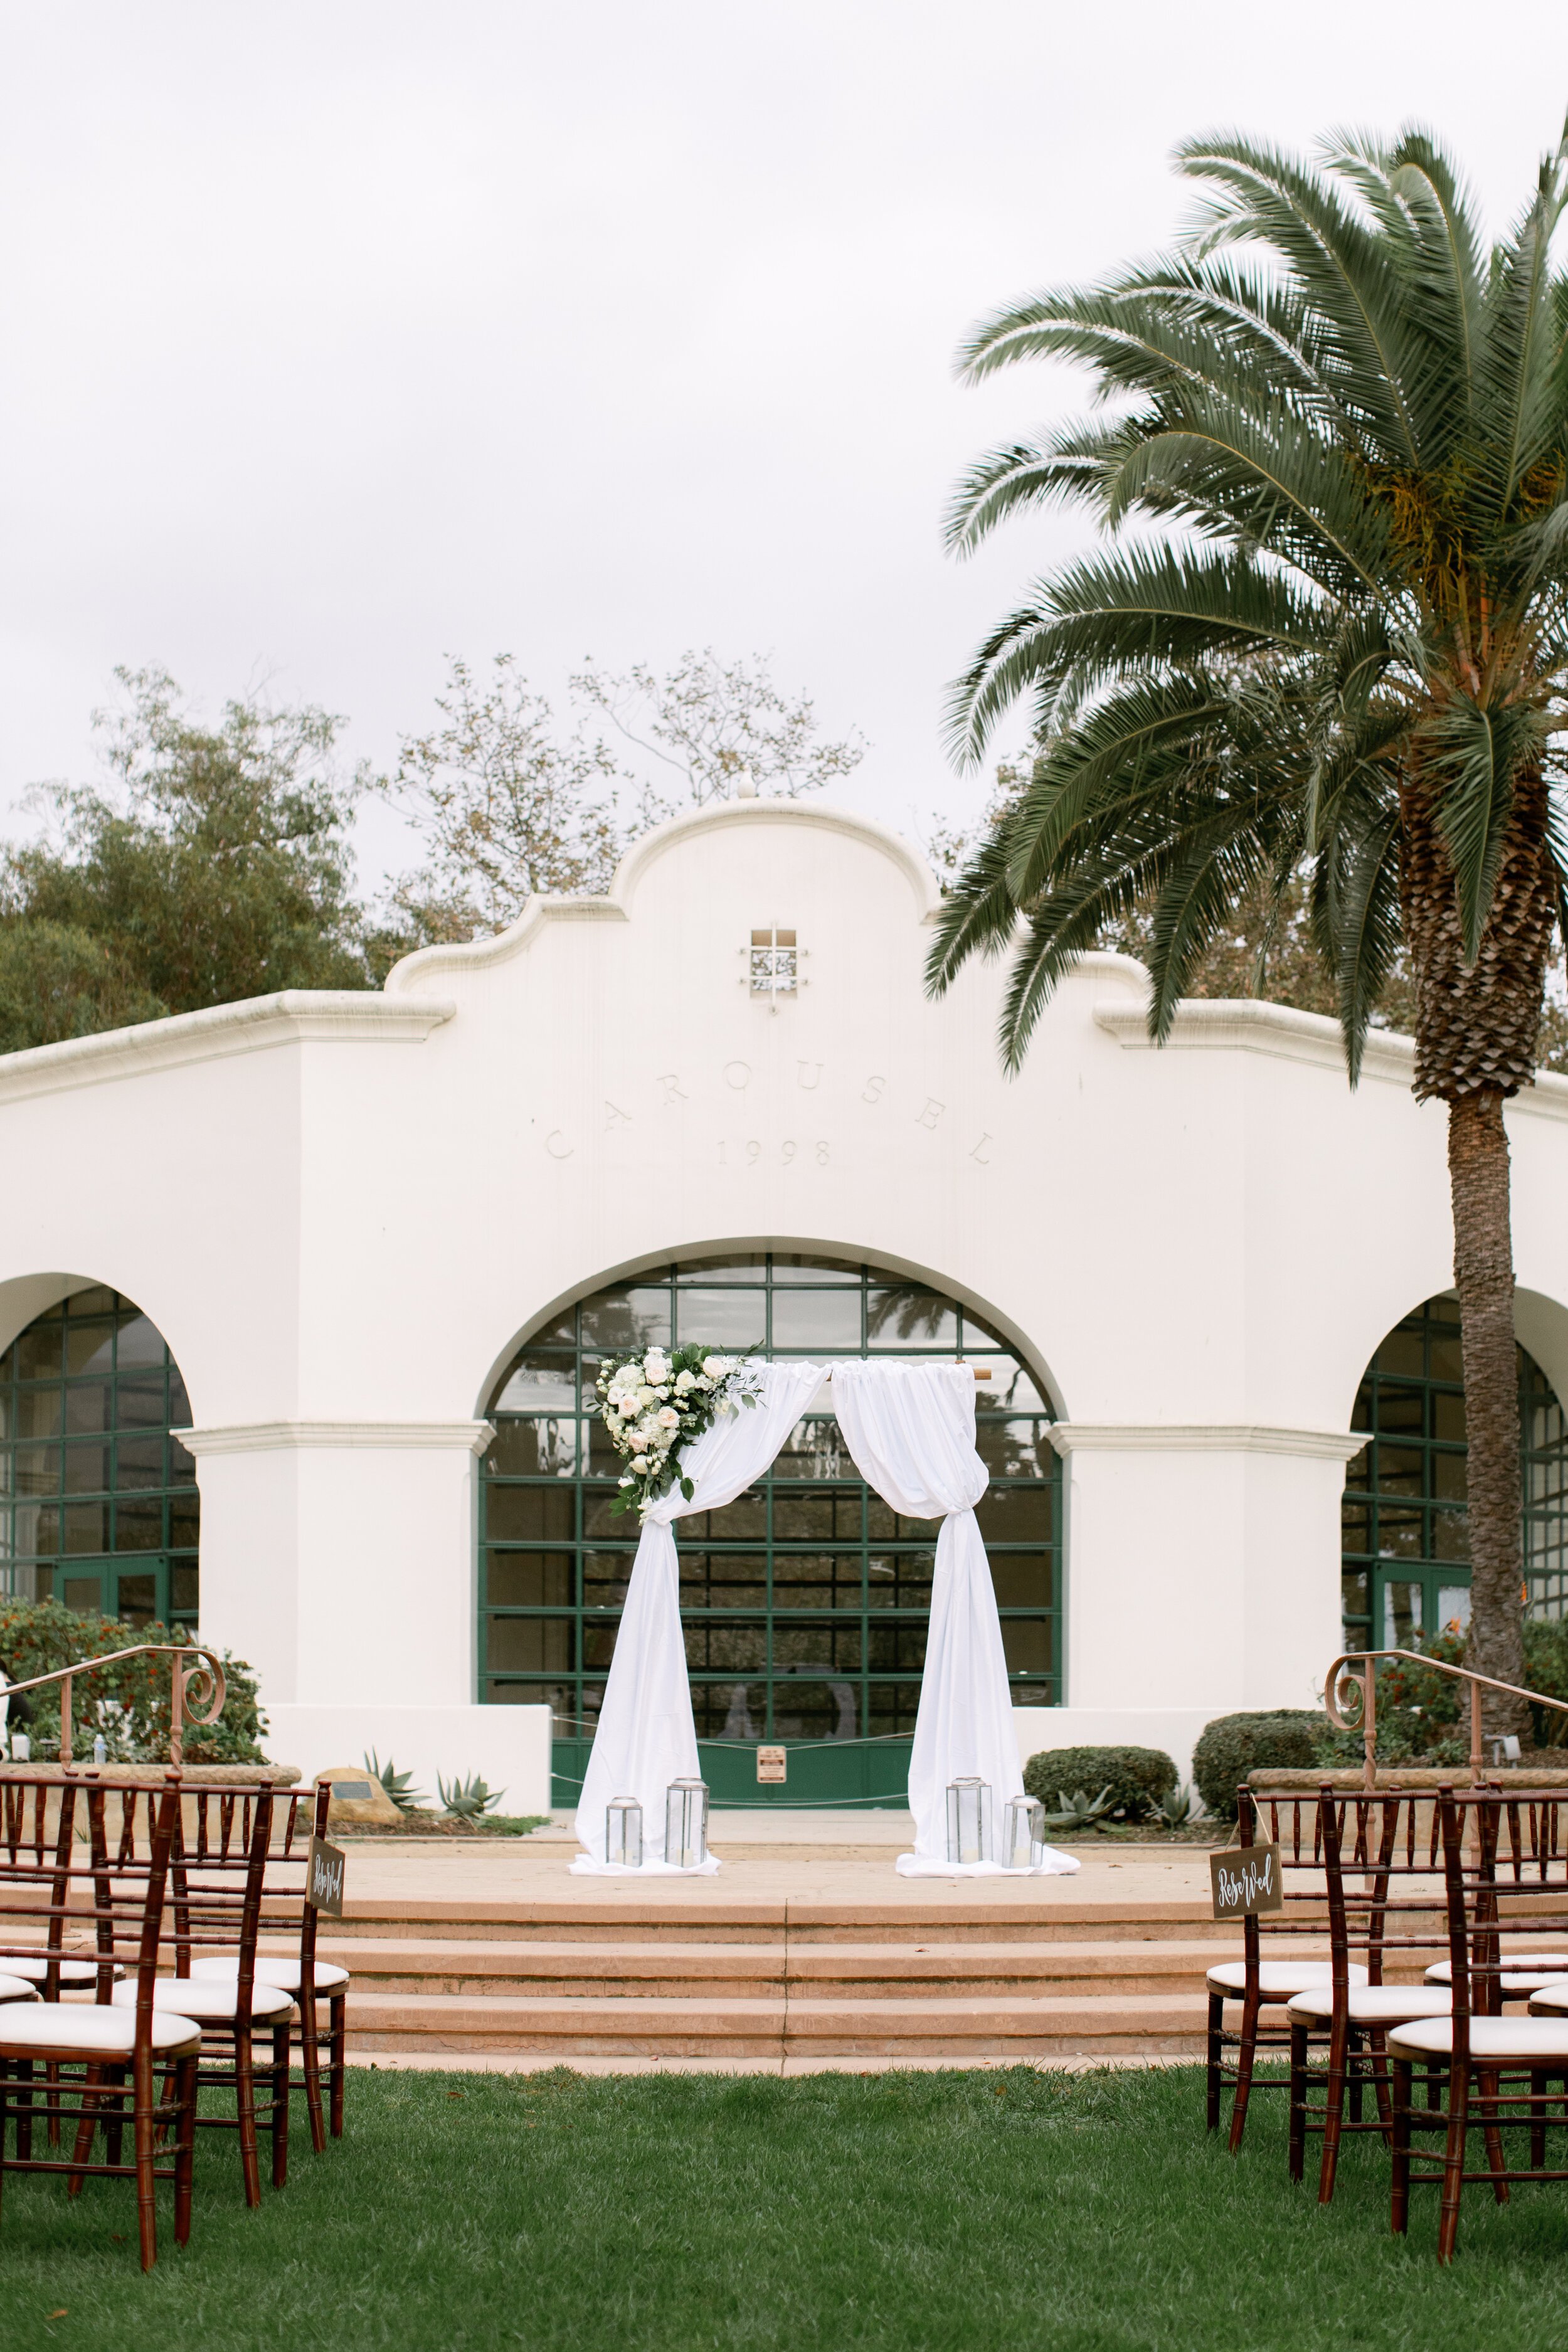 www.santabarbarawedding.com | Events by Fran | Chase Palm Park | Anna Delores Photography | Tangled Lotus | Santa Barbara Chairs | Ceremony Set Up